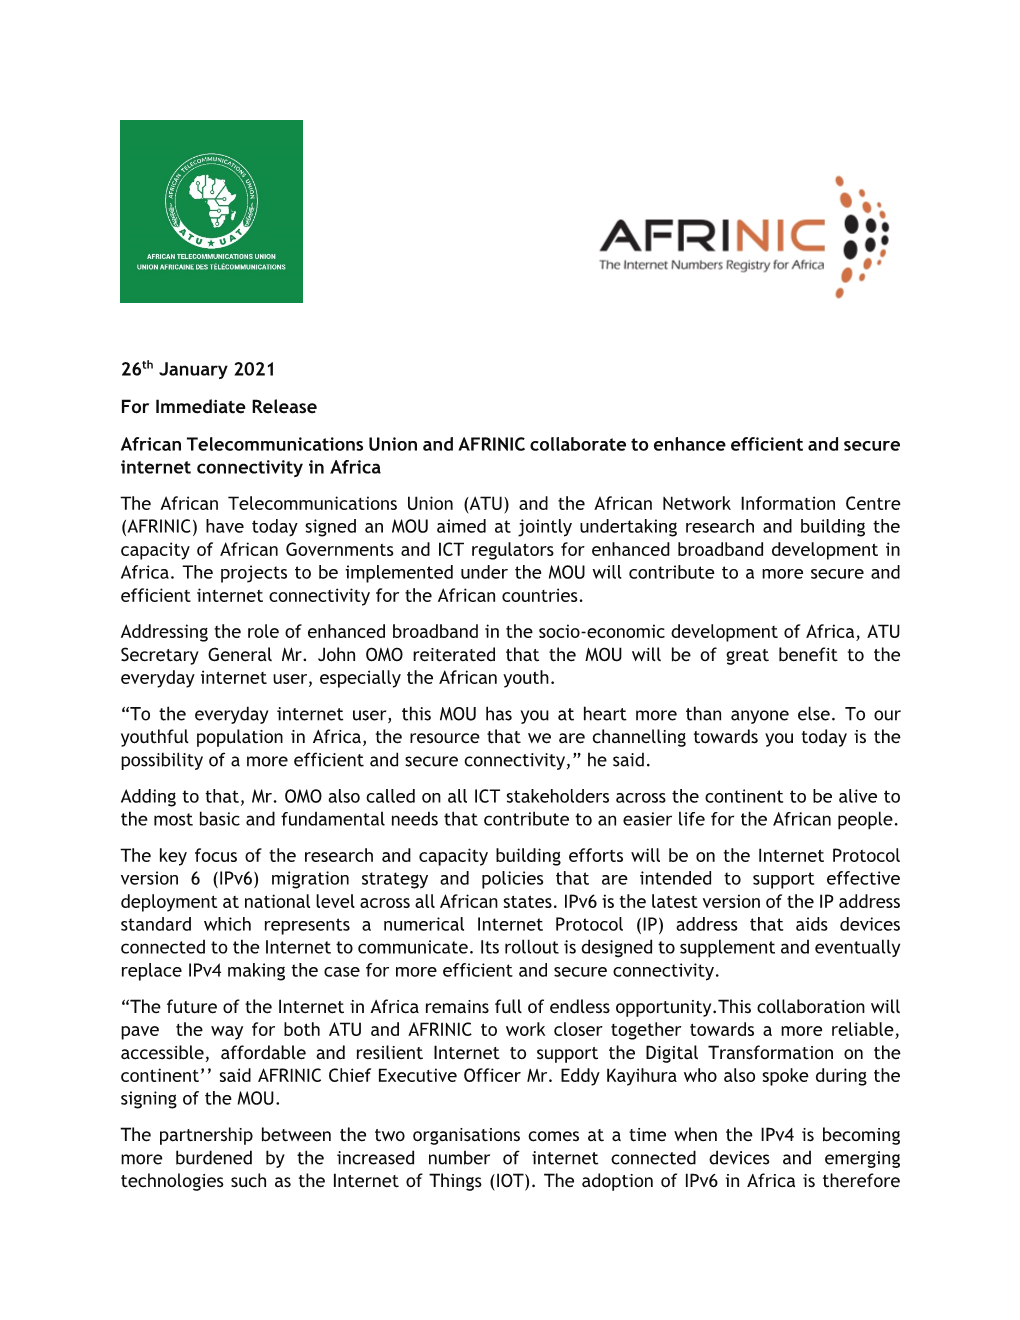 Press Release, African Telecommunication Union and AFRINIC Collaborate to Enhance Efficient and Secure Internet Connectivity In